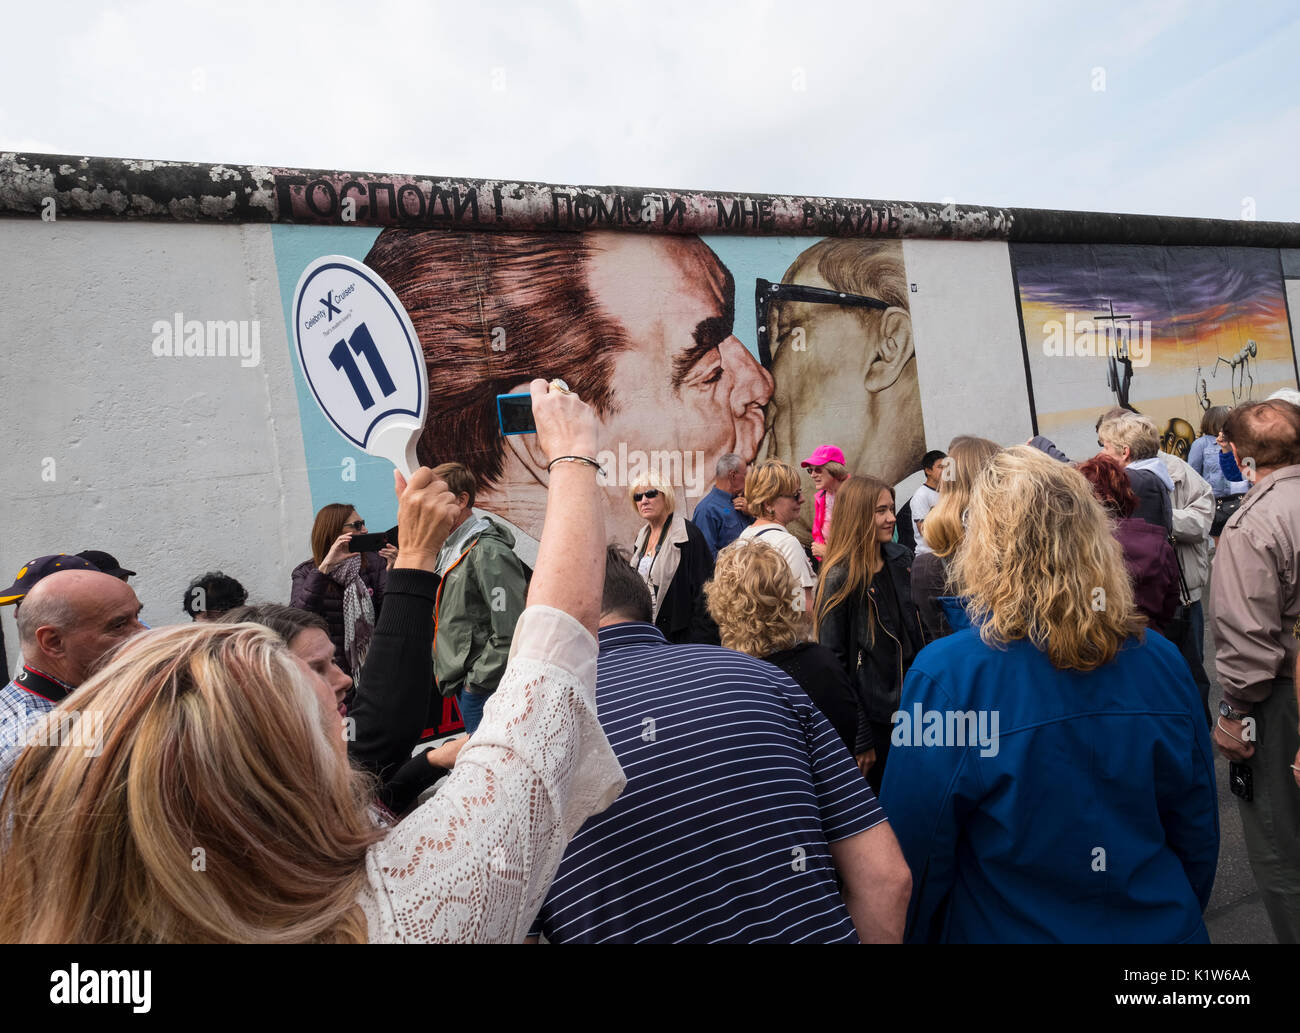 Large tour group taking photos of mural The Kiss painted on original section of Berlin Wall at East Side gallery in Berlin, Germany Stock Photo